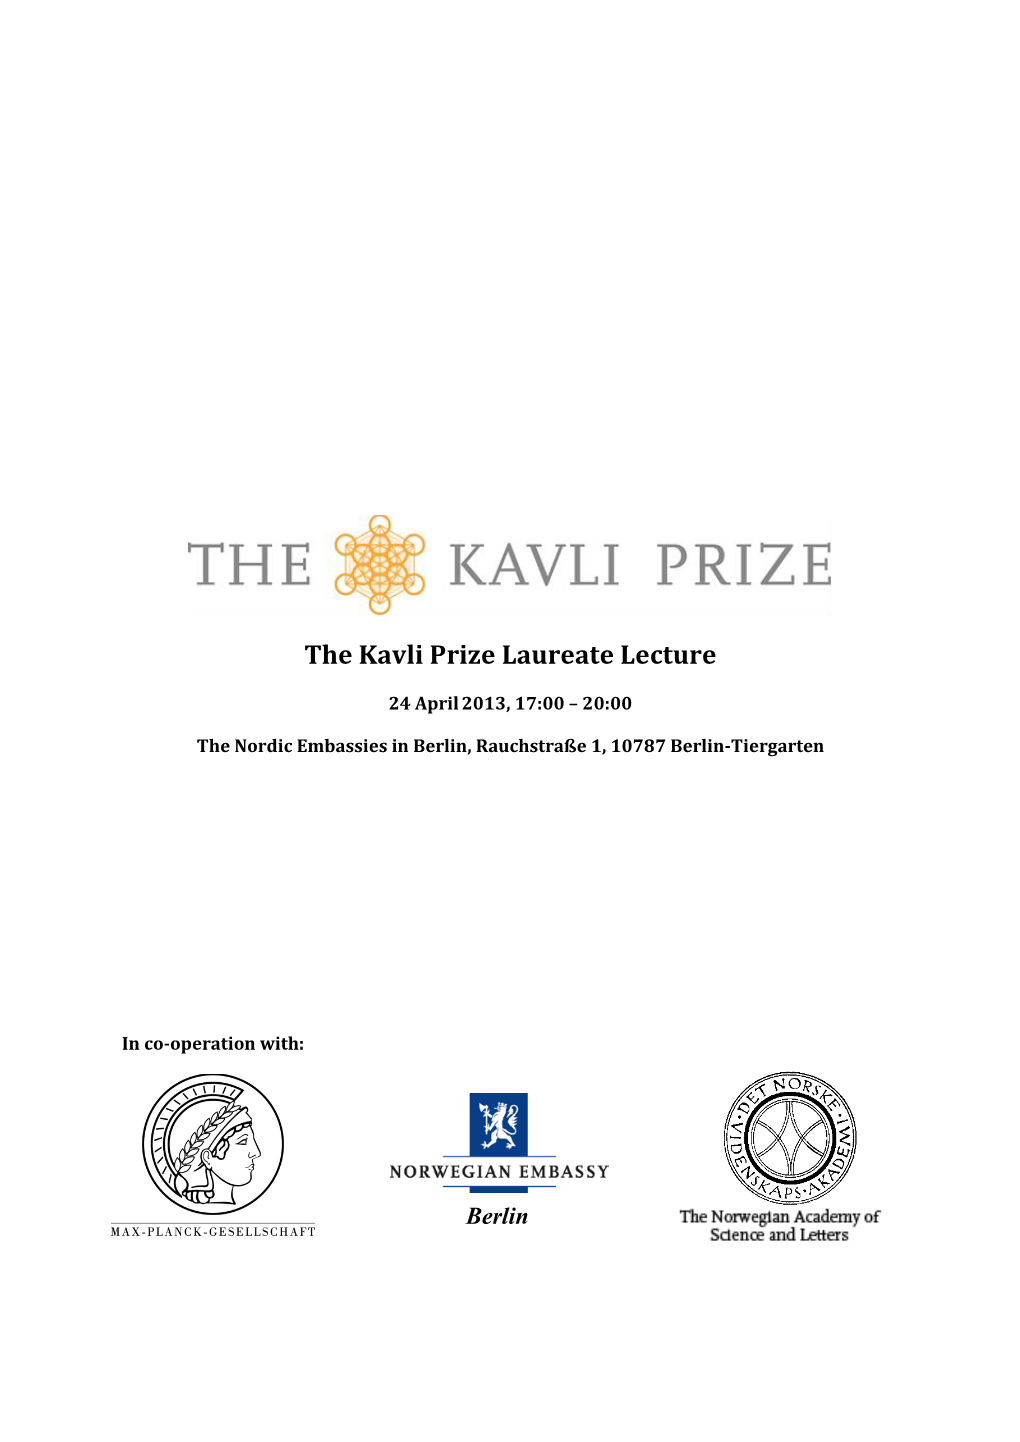 The Kavli Prize Laureate Lecture